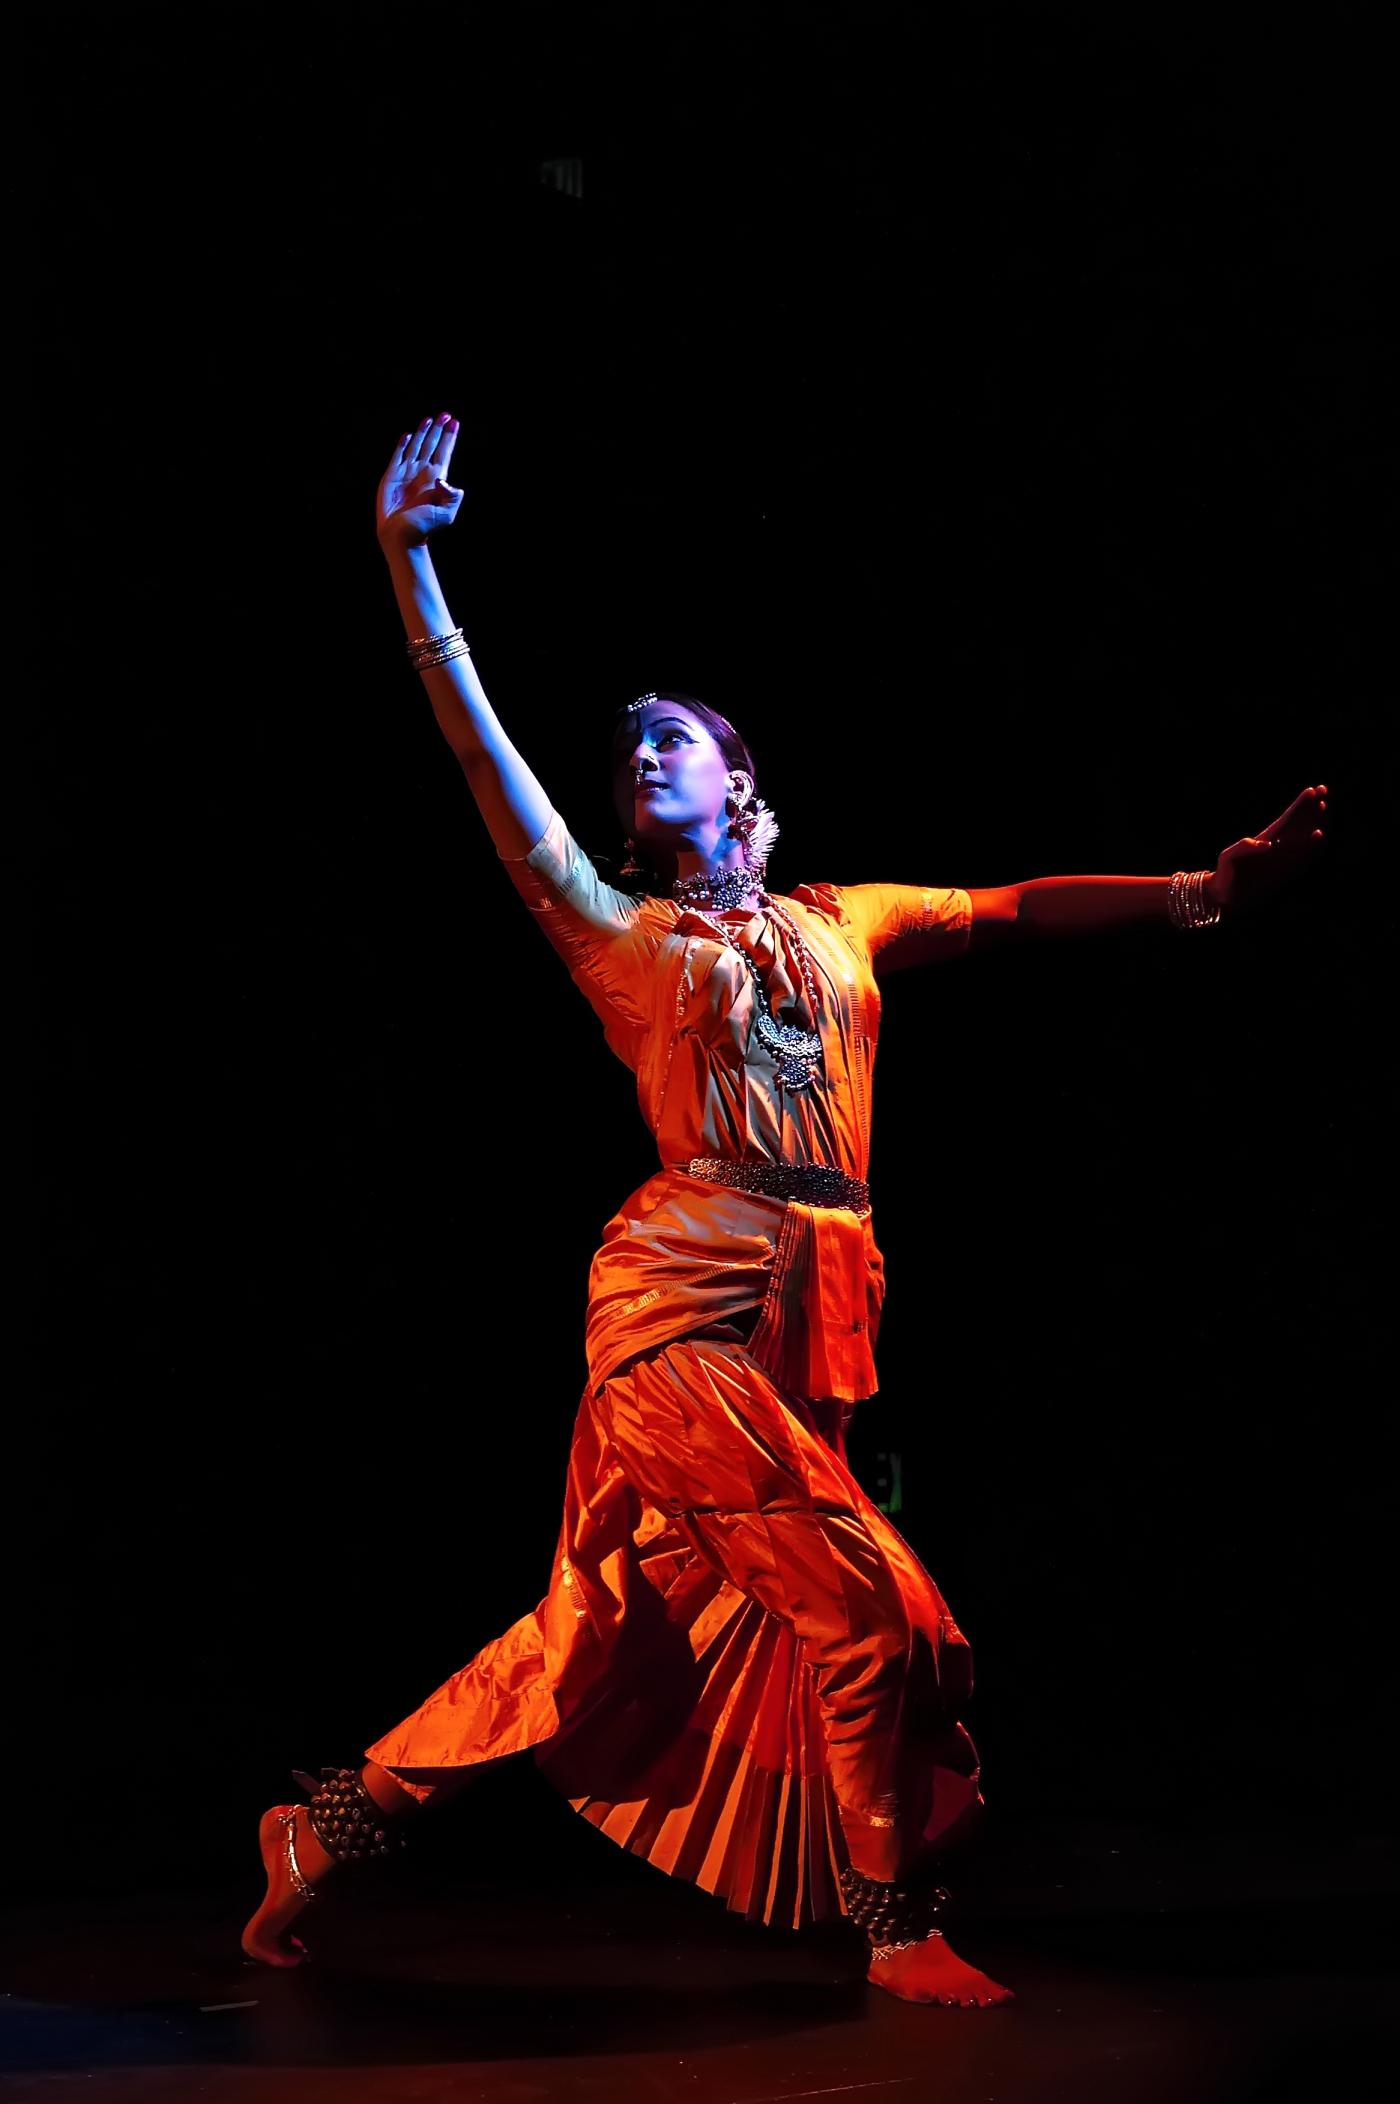 In a spotlight, Mythili dances in traditional Indian garb.